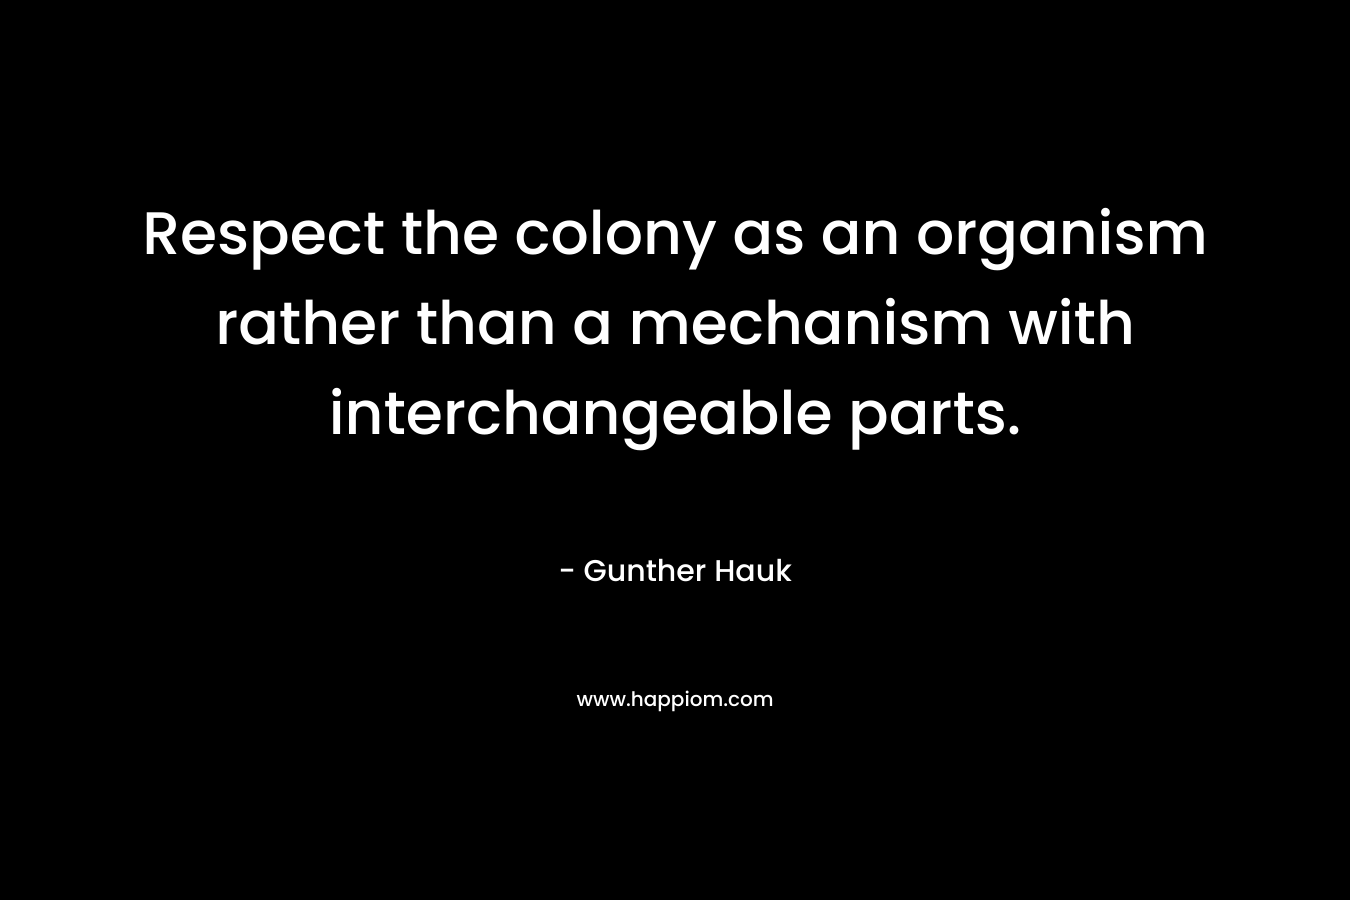 Respect the colony as an organism rather than a mechanism with interchangeable parts.